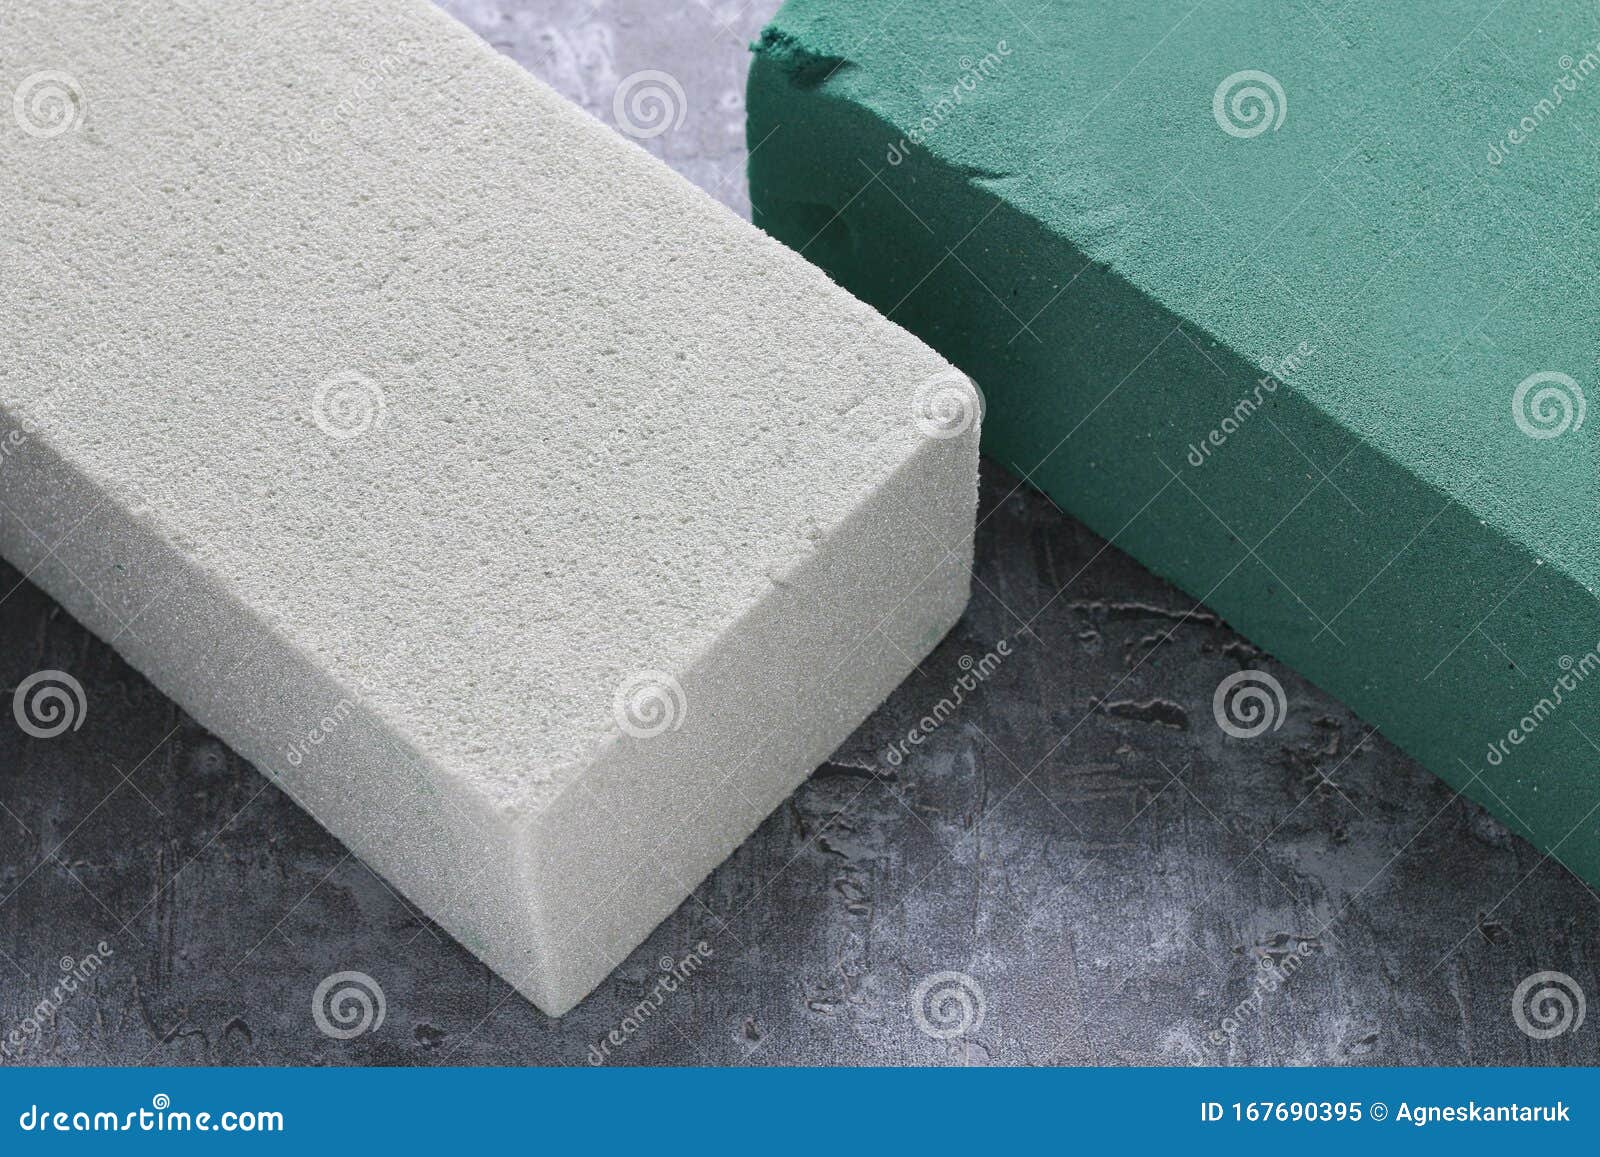 Two kinds of floral foam stock image. Image of grey - 167690395